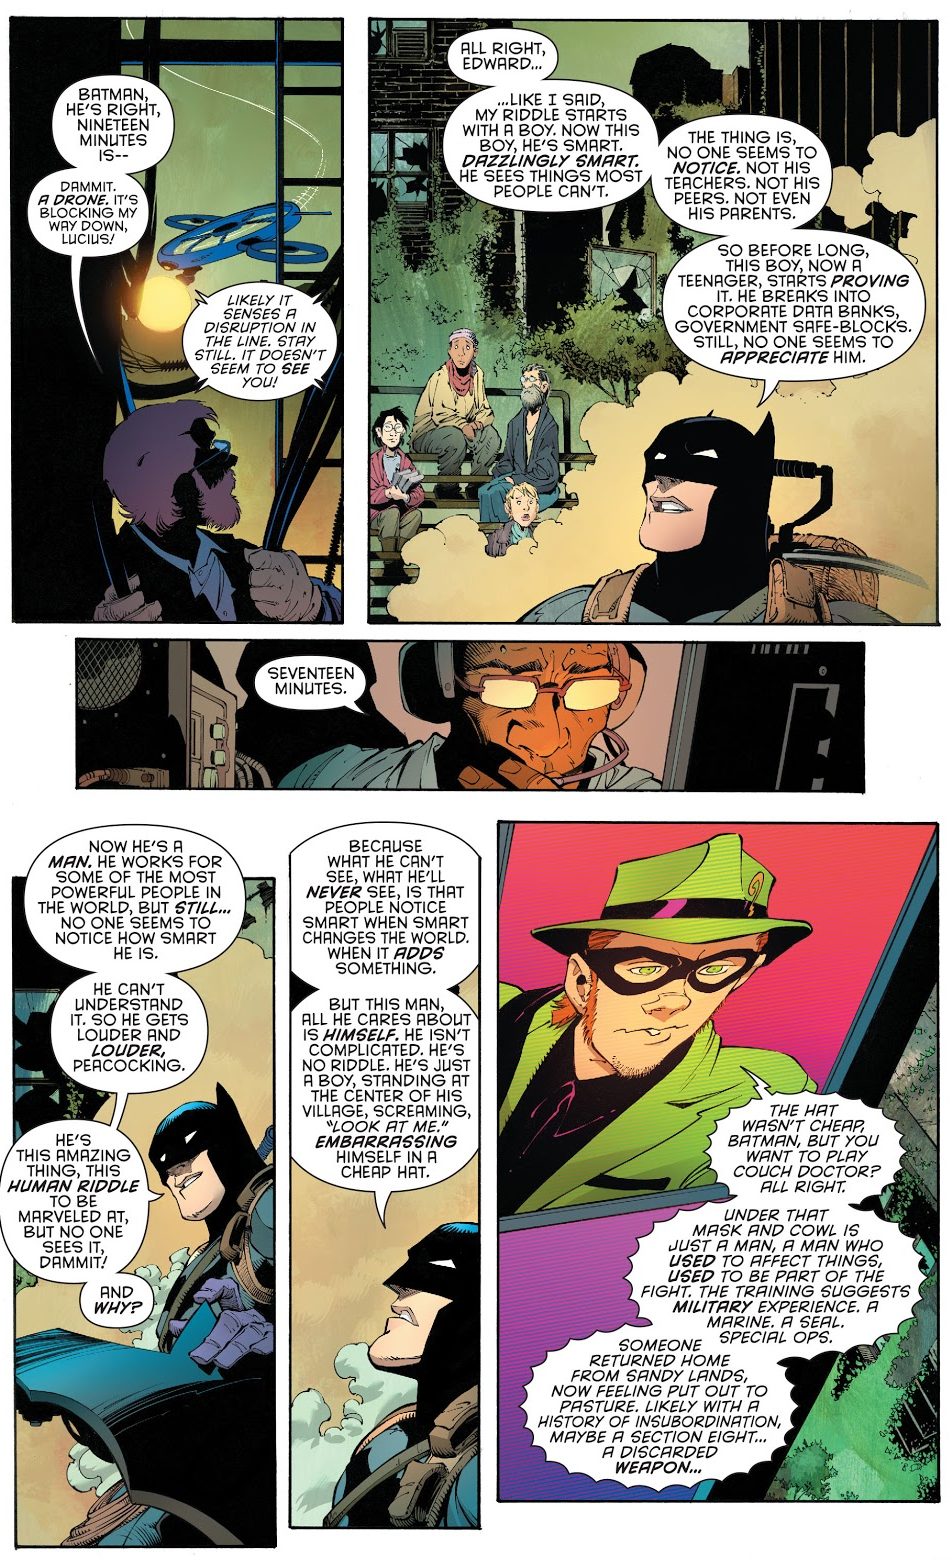 Batman-Challenges-The-Riddle-With-A-Riddle-Zero-Year